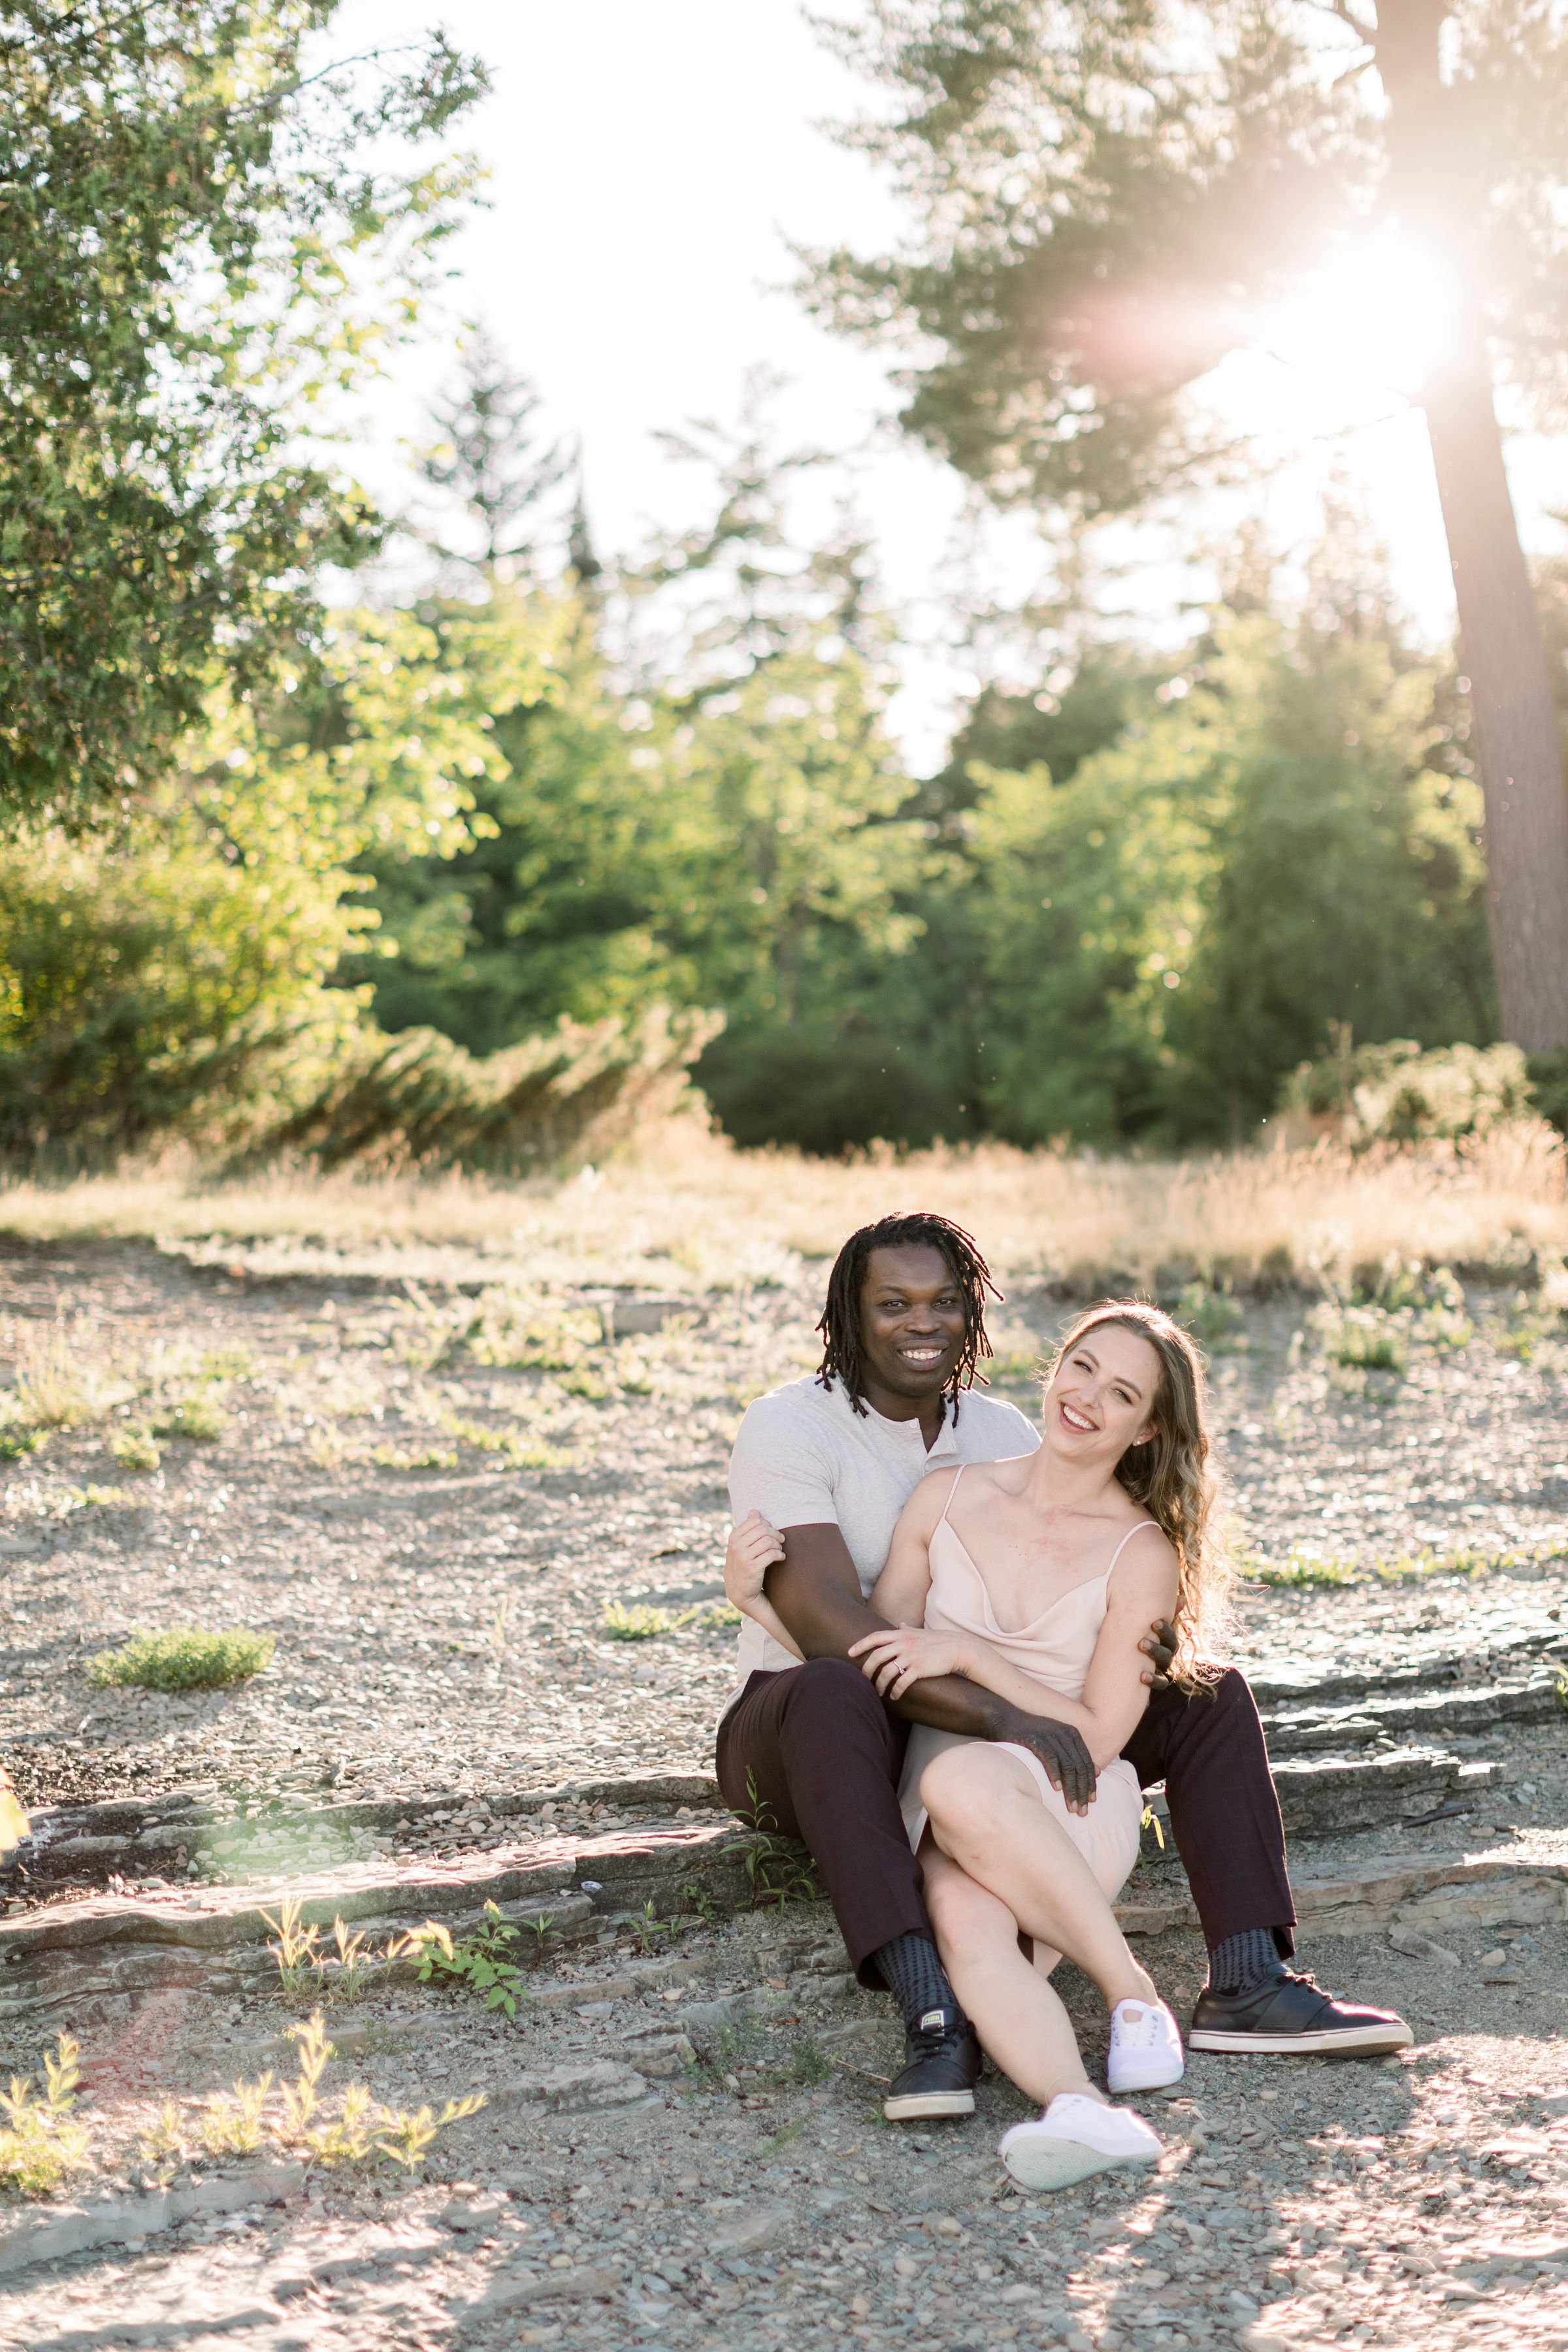  With golden sunburst behind them, a couple smile for engagements with Chelsea mason Photography in Ontario. engagement portrait #Chelseamasonphotography #Chelseamasonengagements #Onatarioengagements #Pinhey'sPoint #Ontarioweddingphotographers 